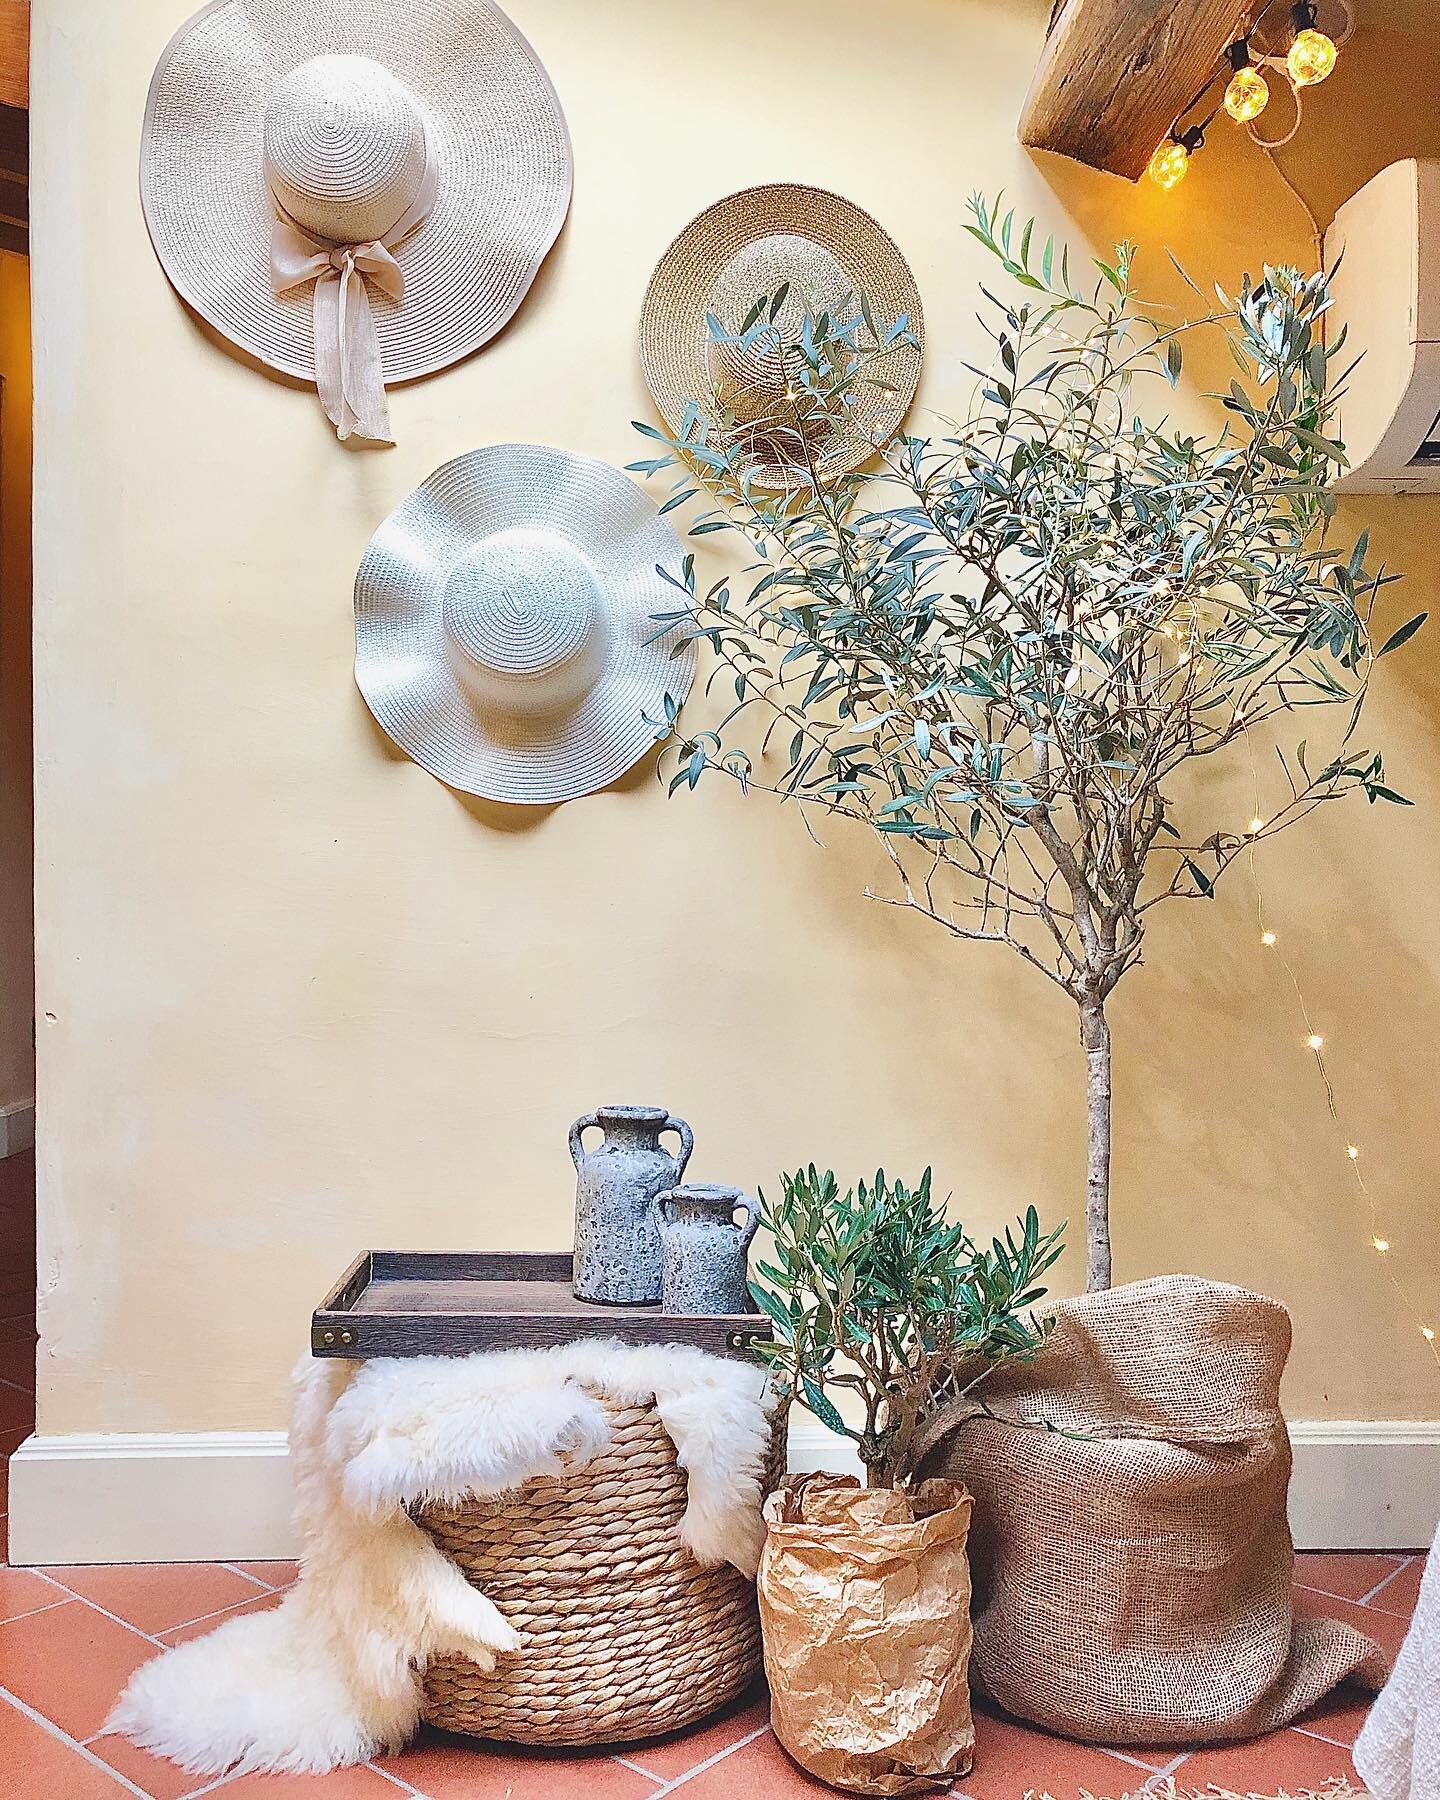 Can I just live in this little corner forever? (And yes, the olive trees are real!)